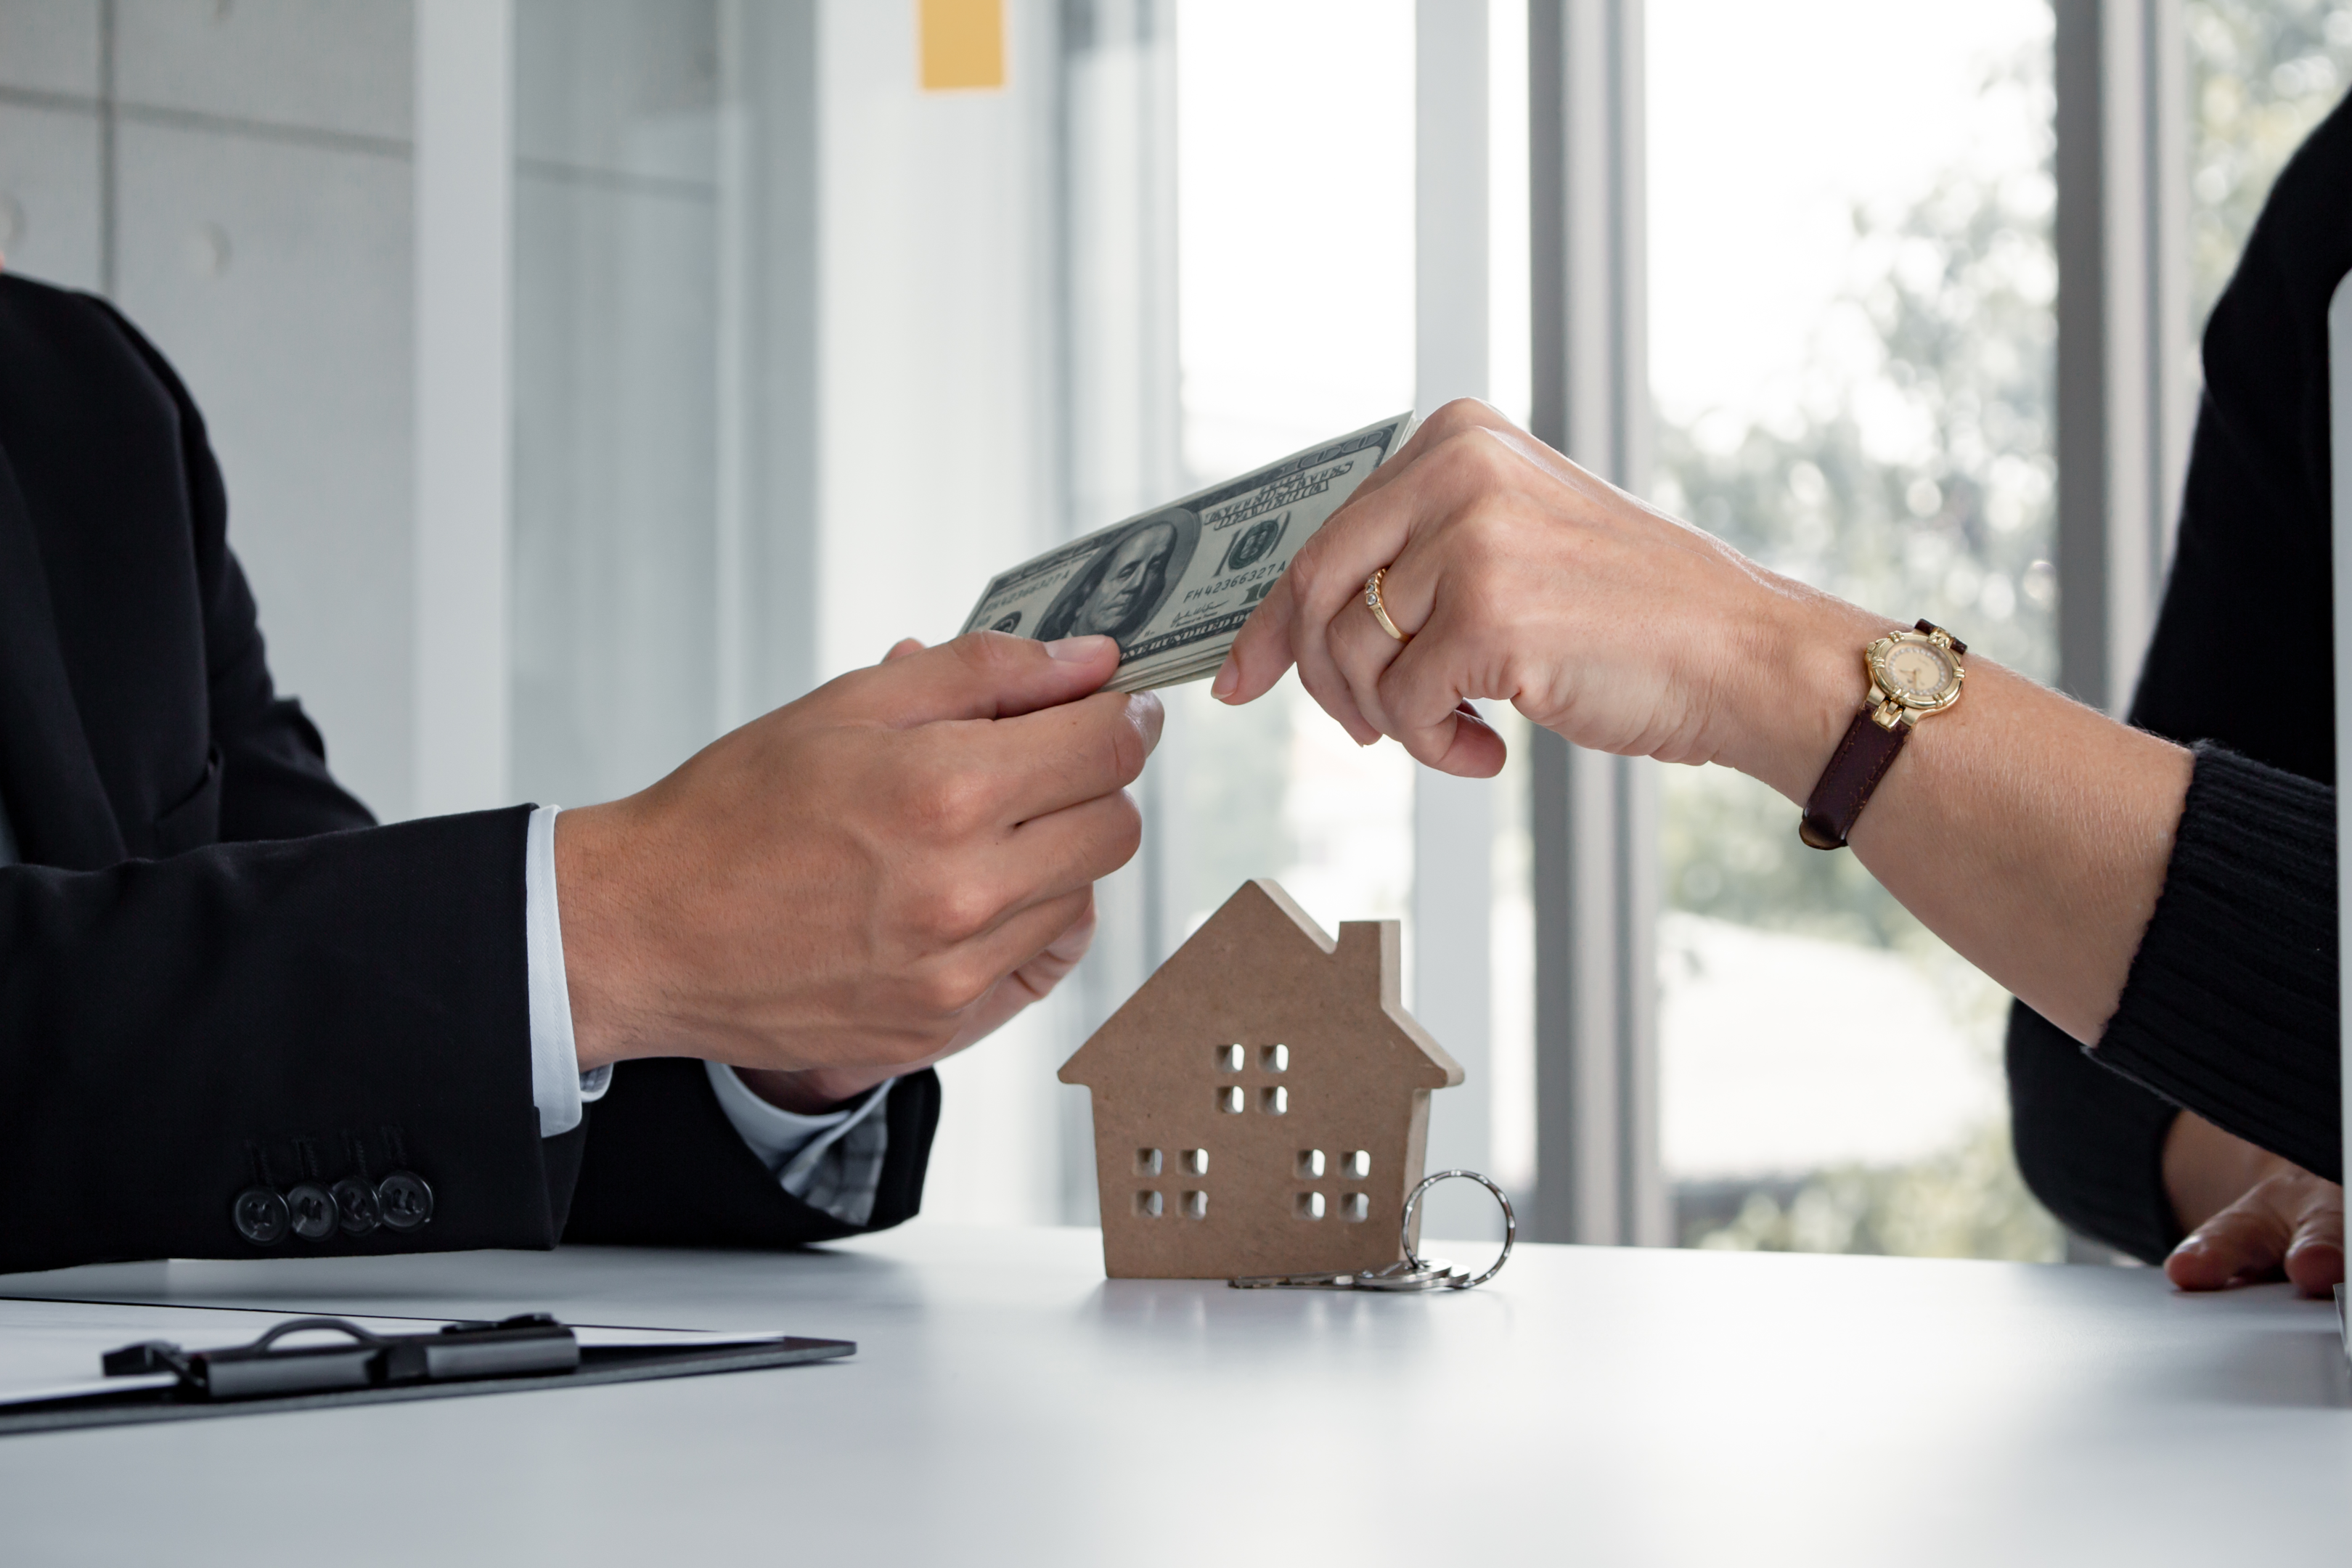 Subletting laws favor tenants, ensuring fair agreements in California. Protect yourself with a solid California sublease agreement. Most landlords understand the importance of clear terms for a harmonious subleasing experience